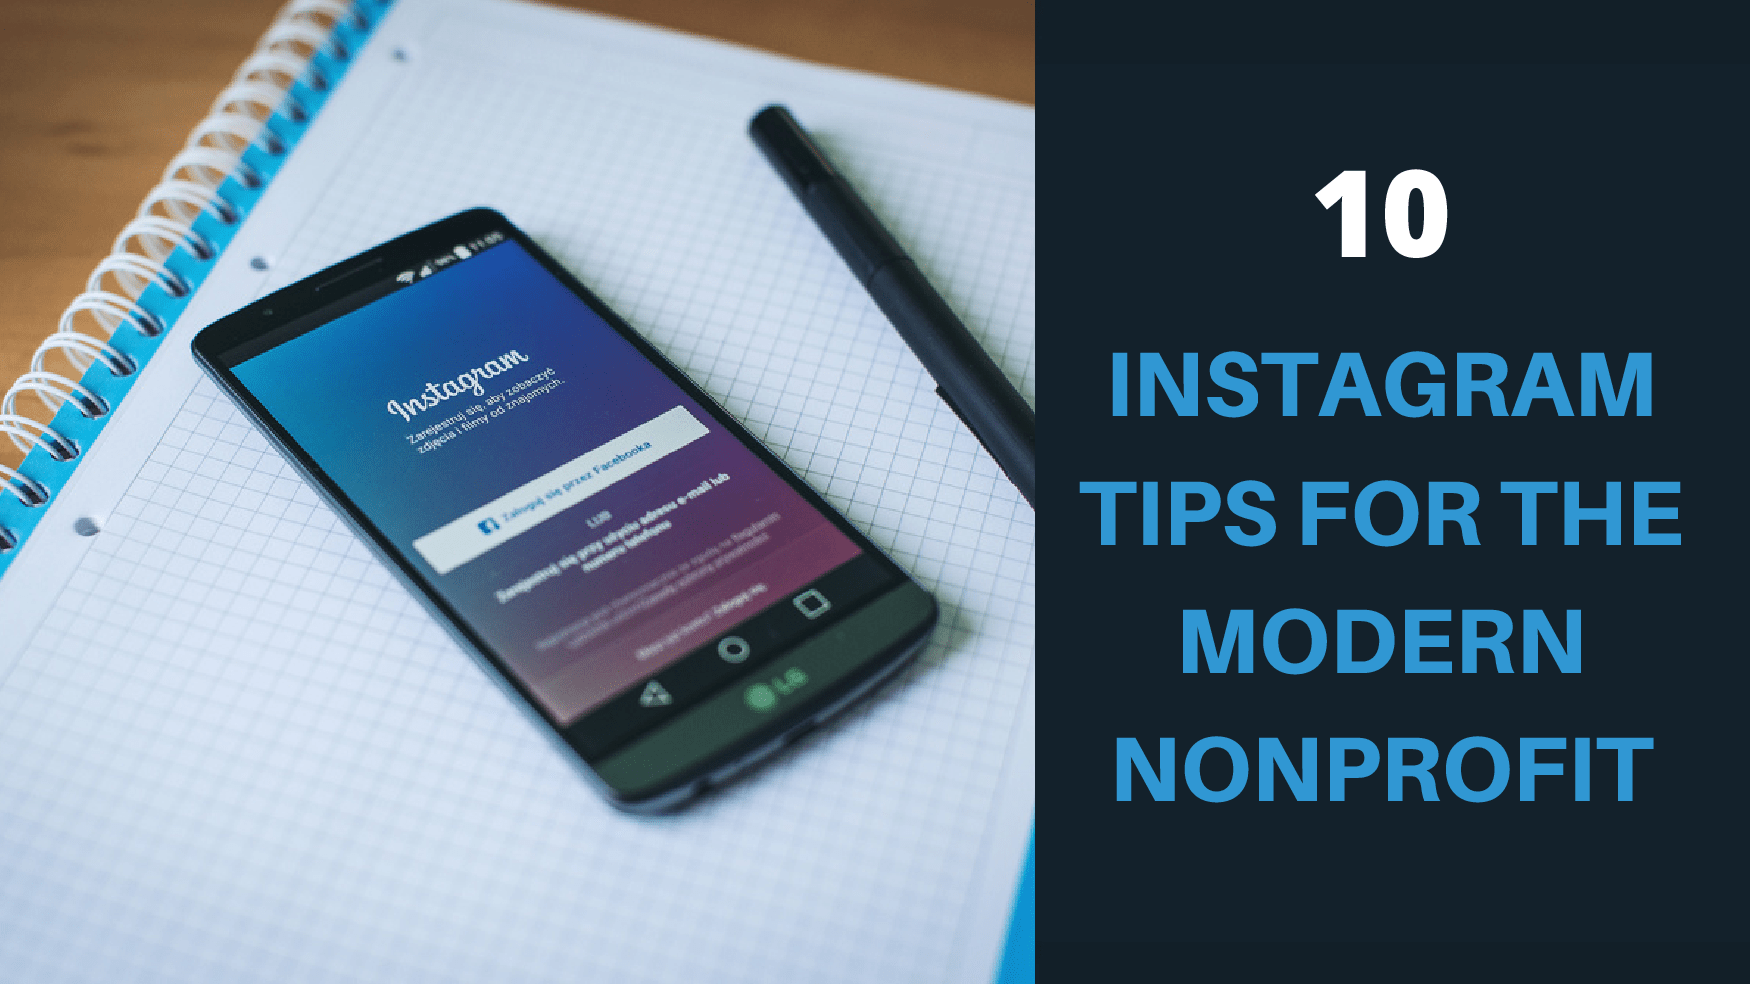 Top 10 Instagram Tips for the Modern Nonprofit (2021)